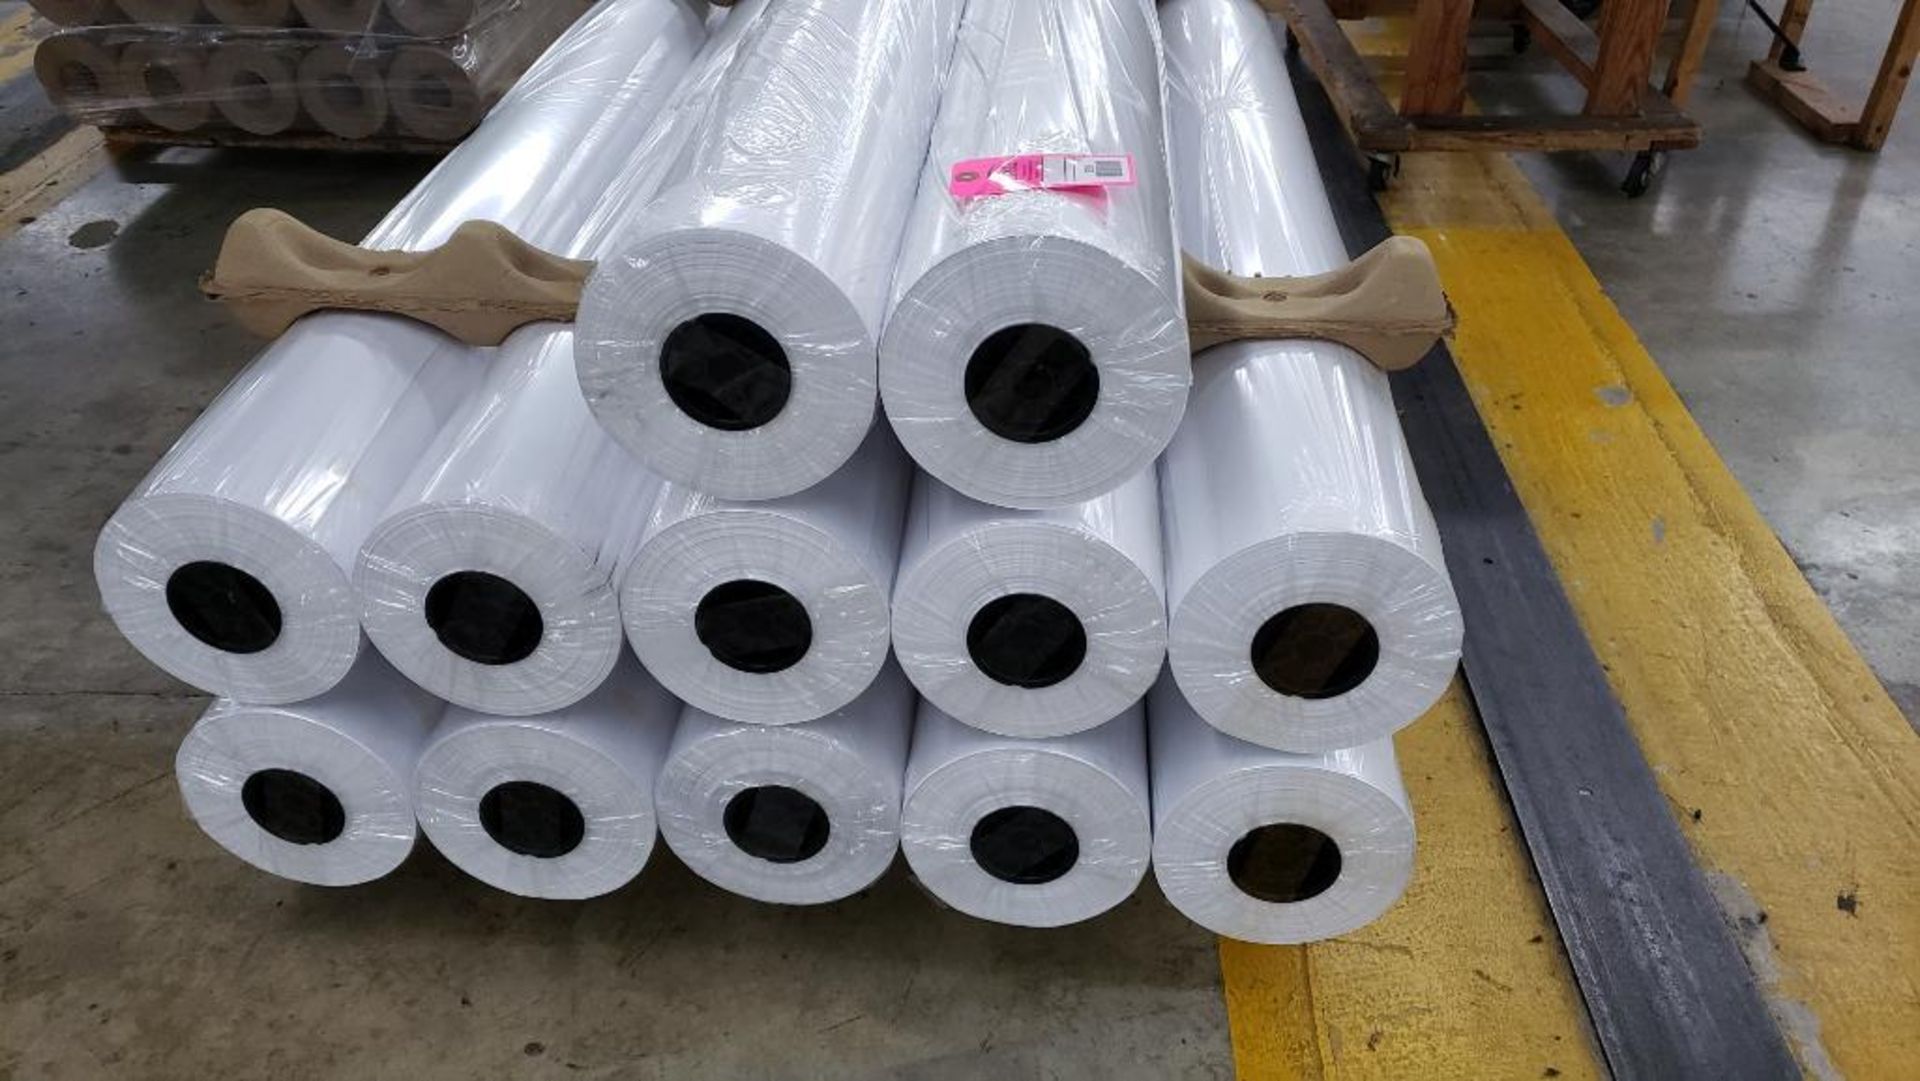 Qty 12 - Rolls of paper. - Image 2 of 3